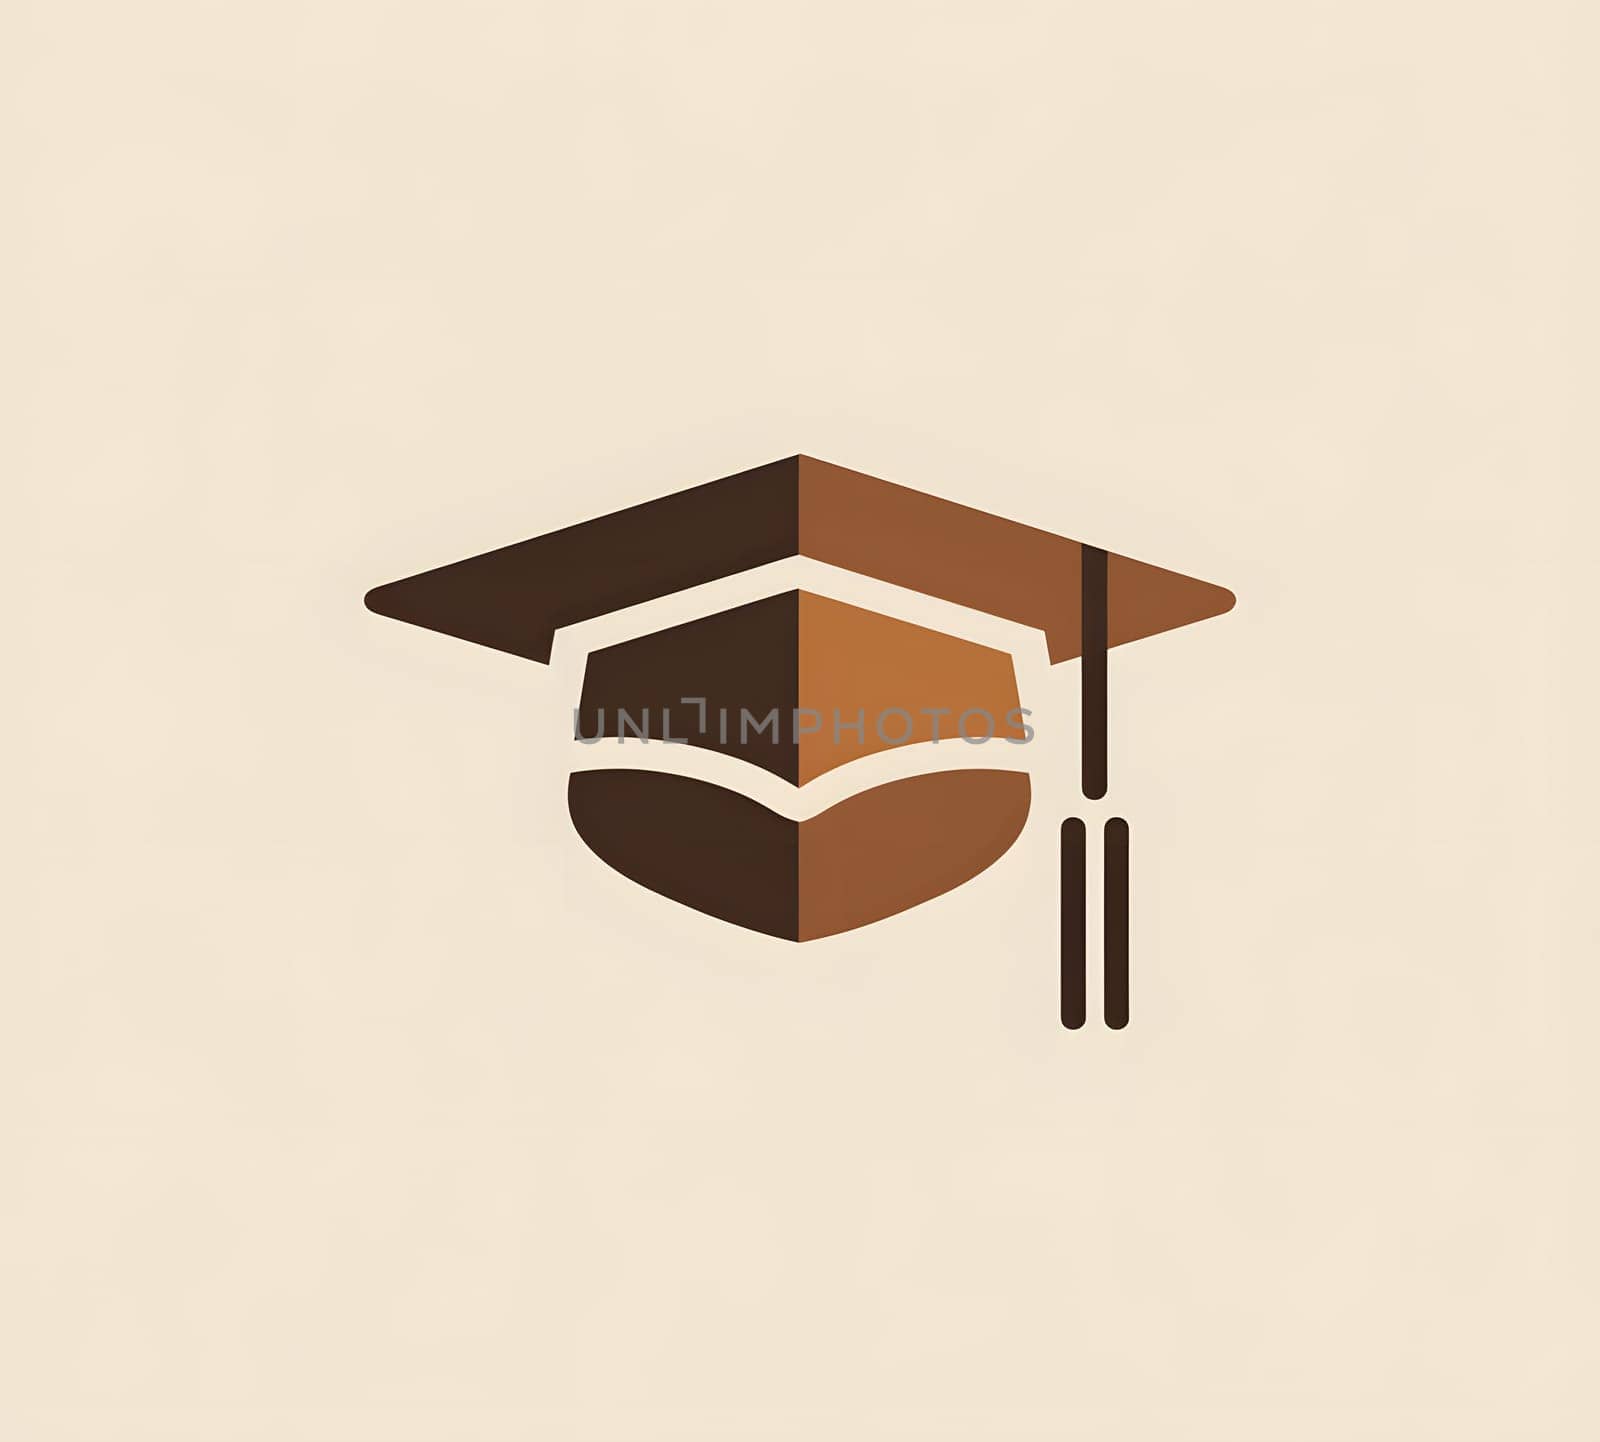 A brown graduation cap with a tassel is featured on a beige background with a circle logo in the corner. The design includes graphics and symbols, creating a sleek and modern look